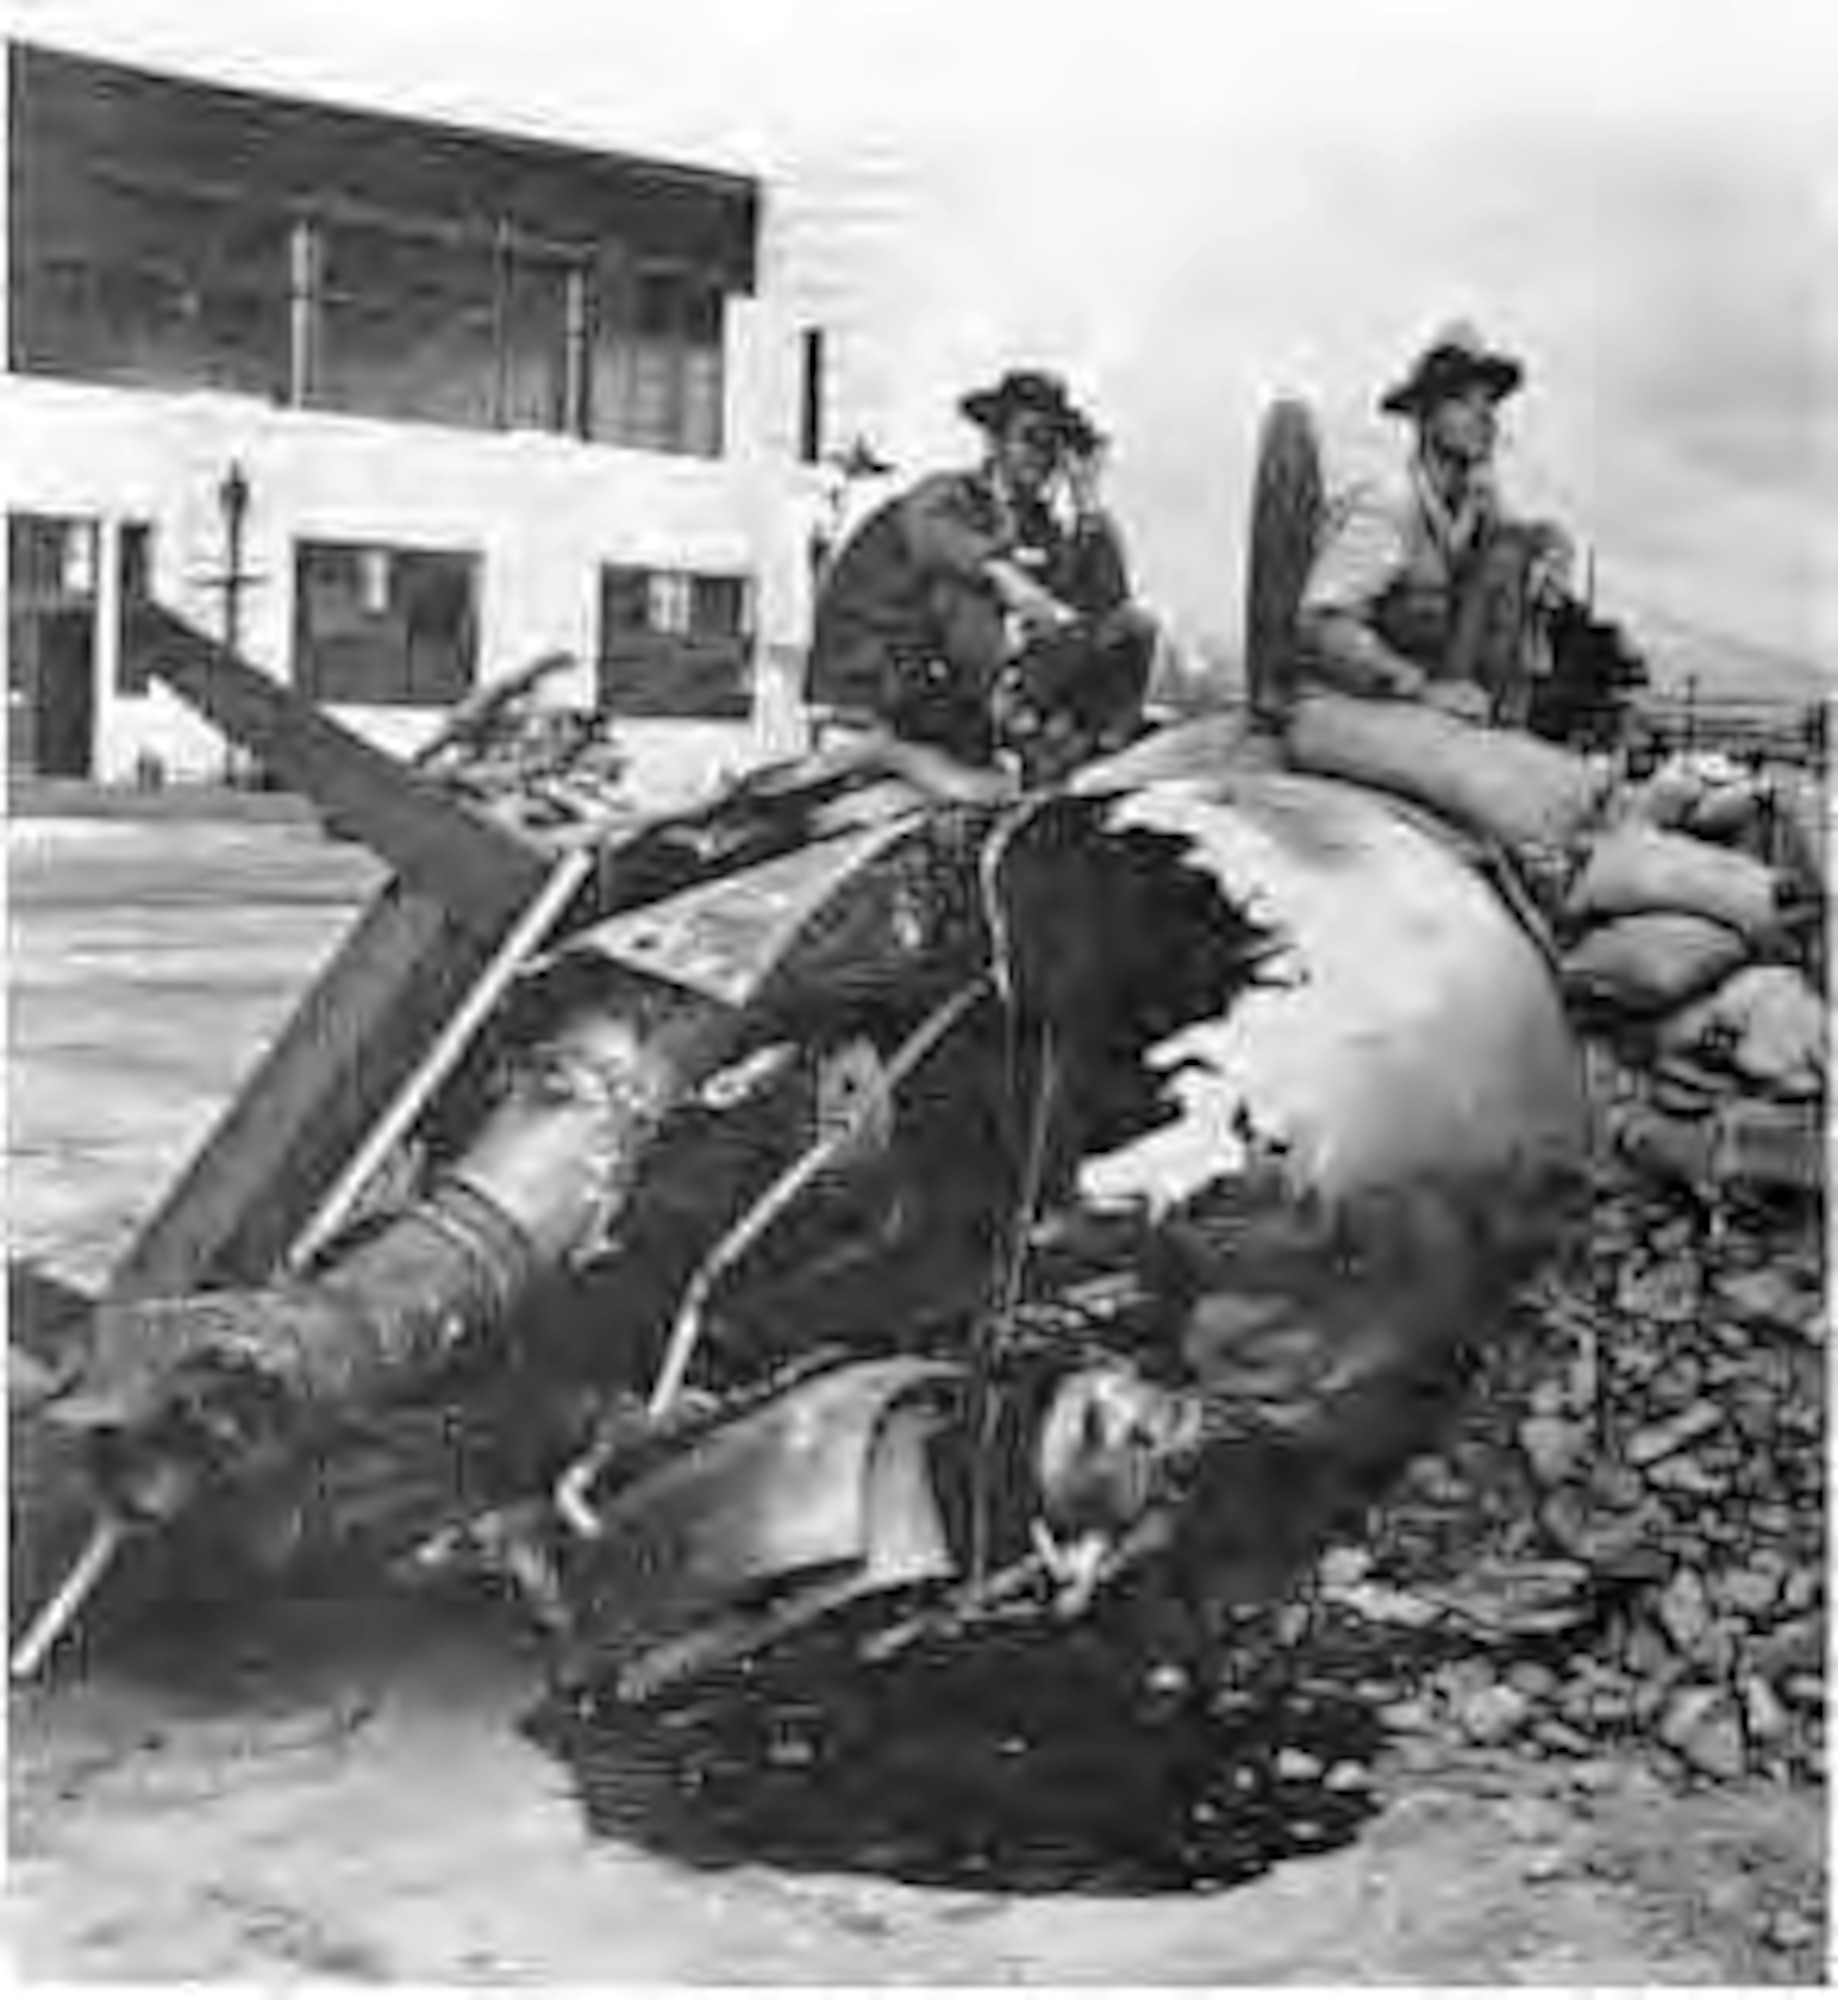 This hastily constructed gun emplacement in front of Hangar 5, Hickam Air Field, was manned shortly after the raid Dec. 7, 1941 by Pvt. 1st Class Raymond Perry (left, with binoculars) and Cpl. Howard Marquardt of South Dakota. A burned-out aircraft engine, sand bags, table, and debris from the attack made up the construction material for this bunker.   